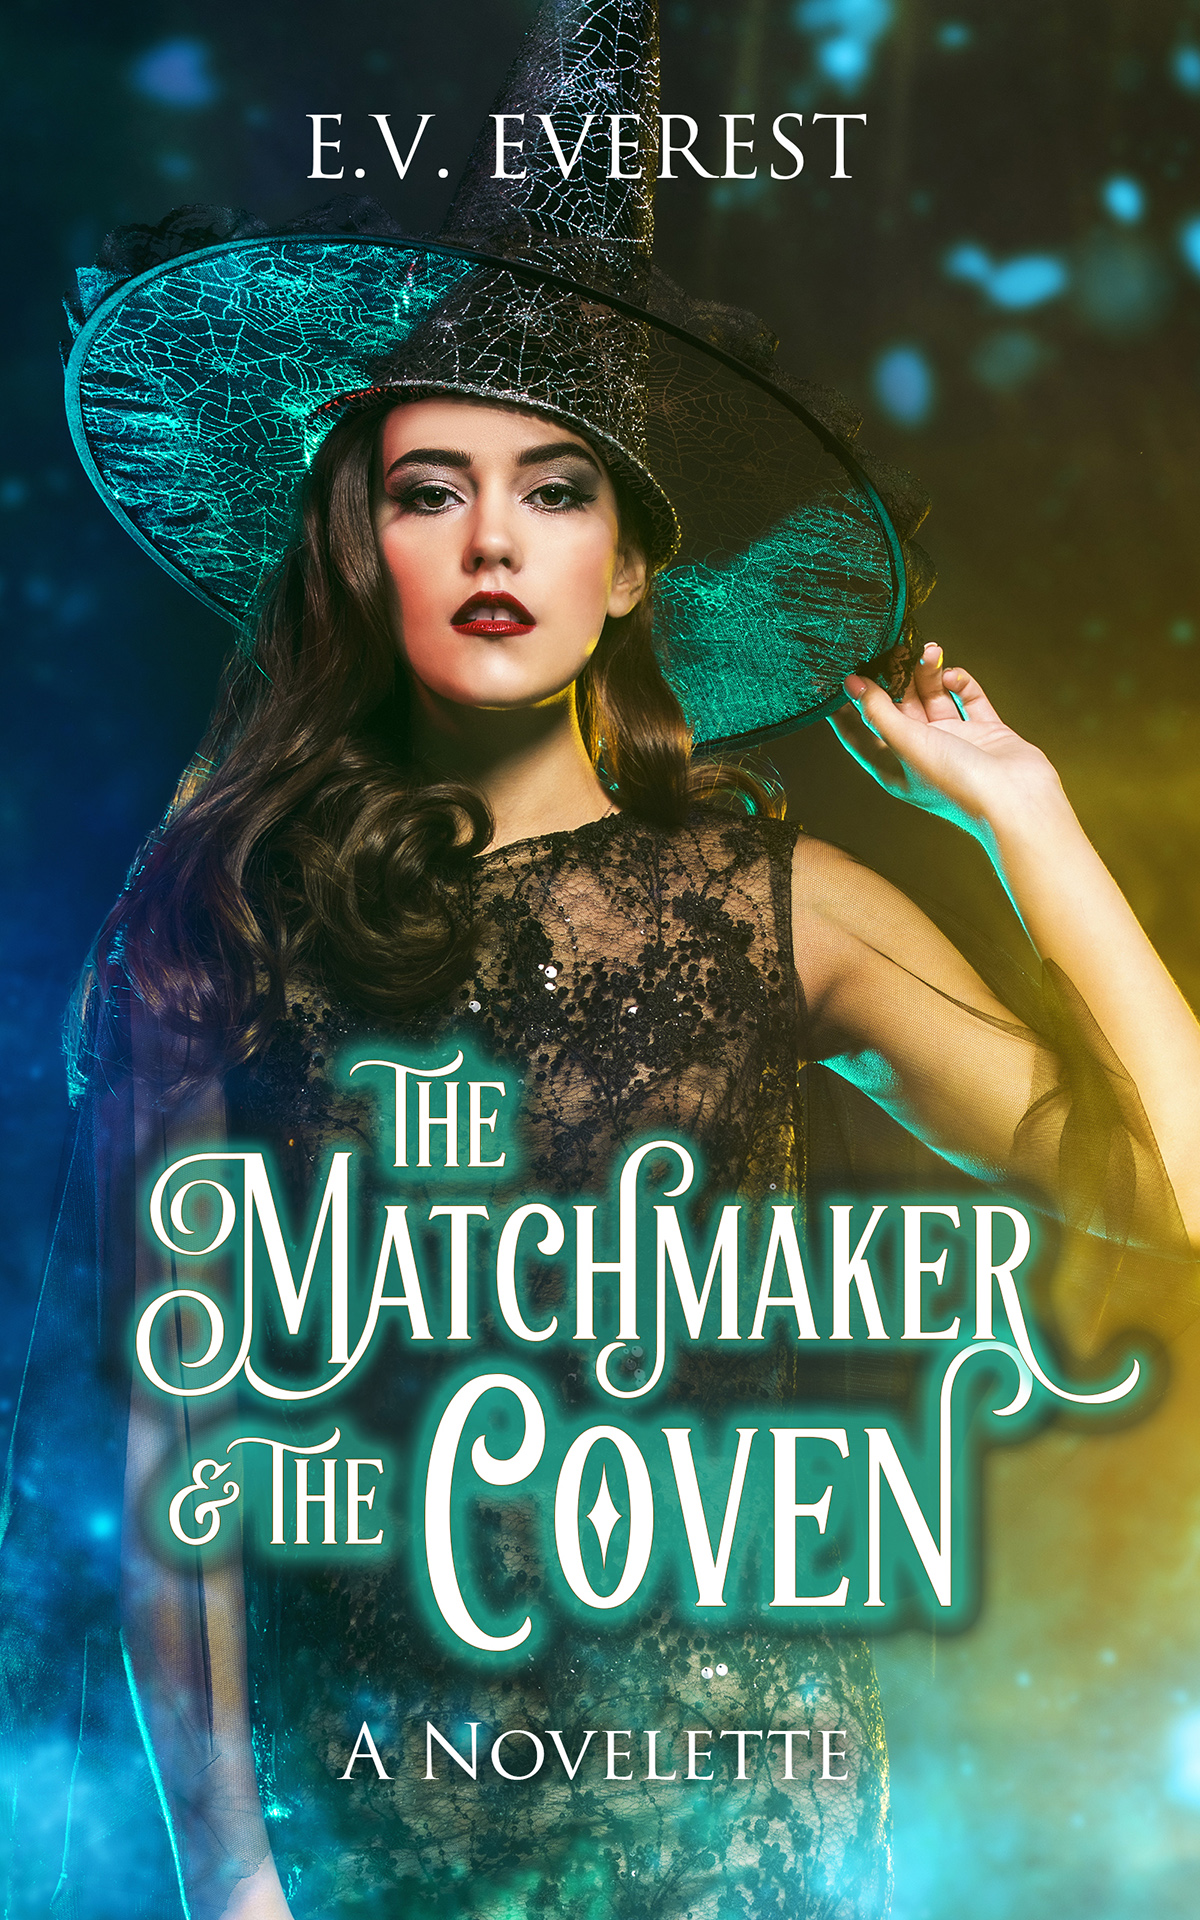 FREE: The Matchmaker & the Coven by E.V. Everest